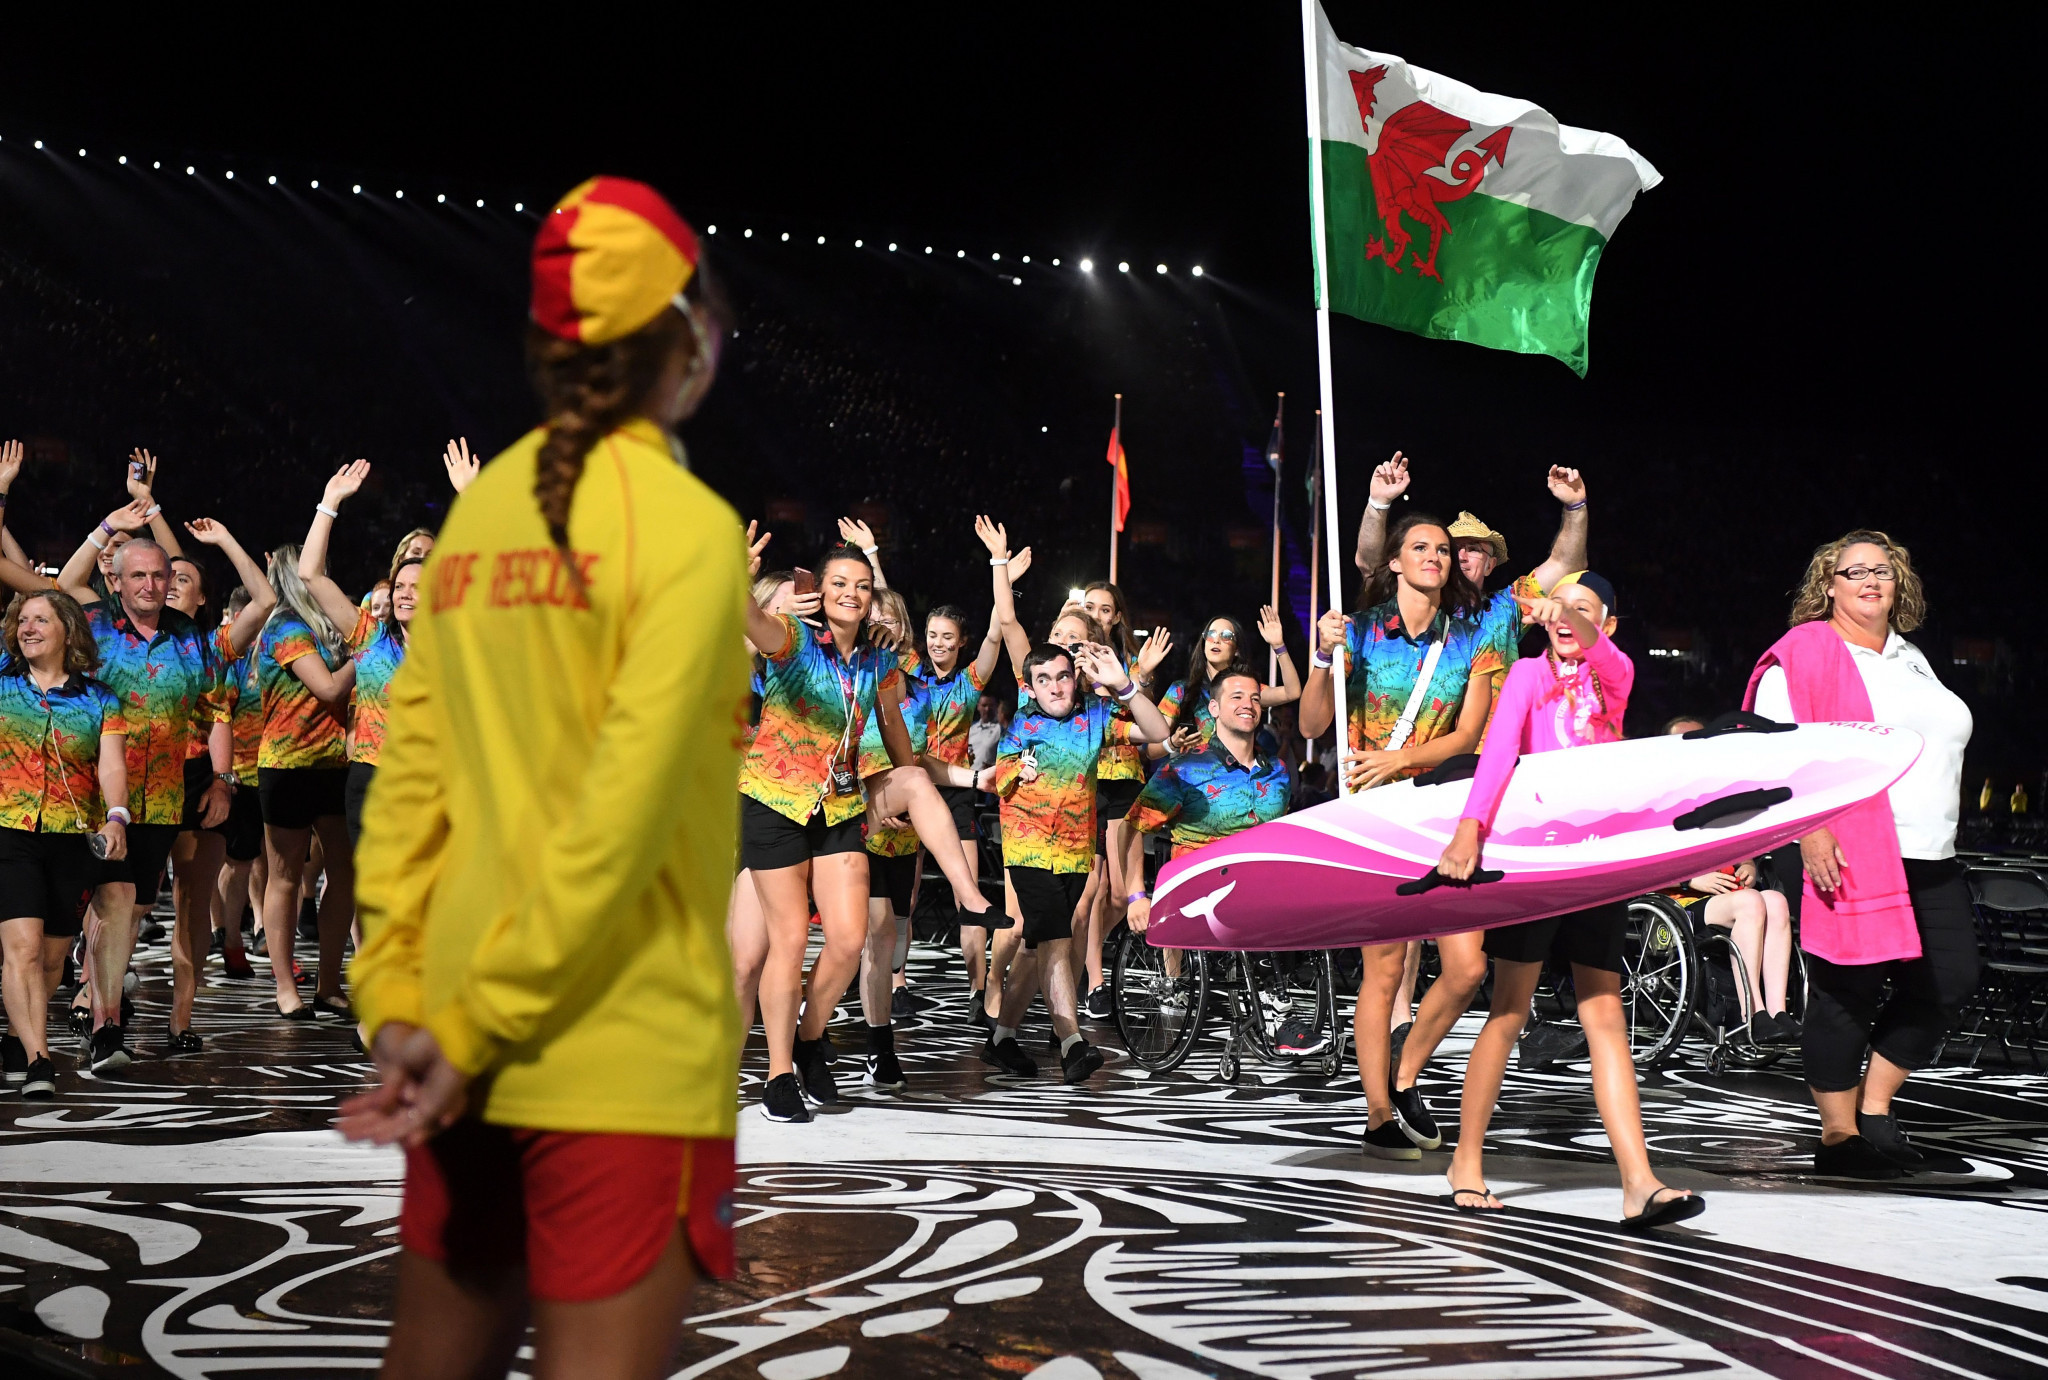 Wales enjoyed their record Commonwealth Games performance at Gold Coast 2018 ©Getty Images